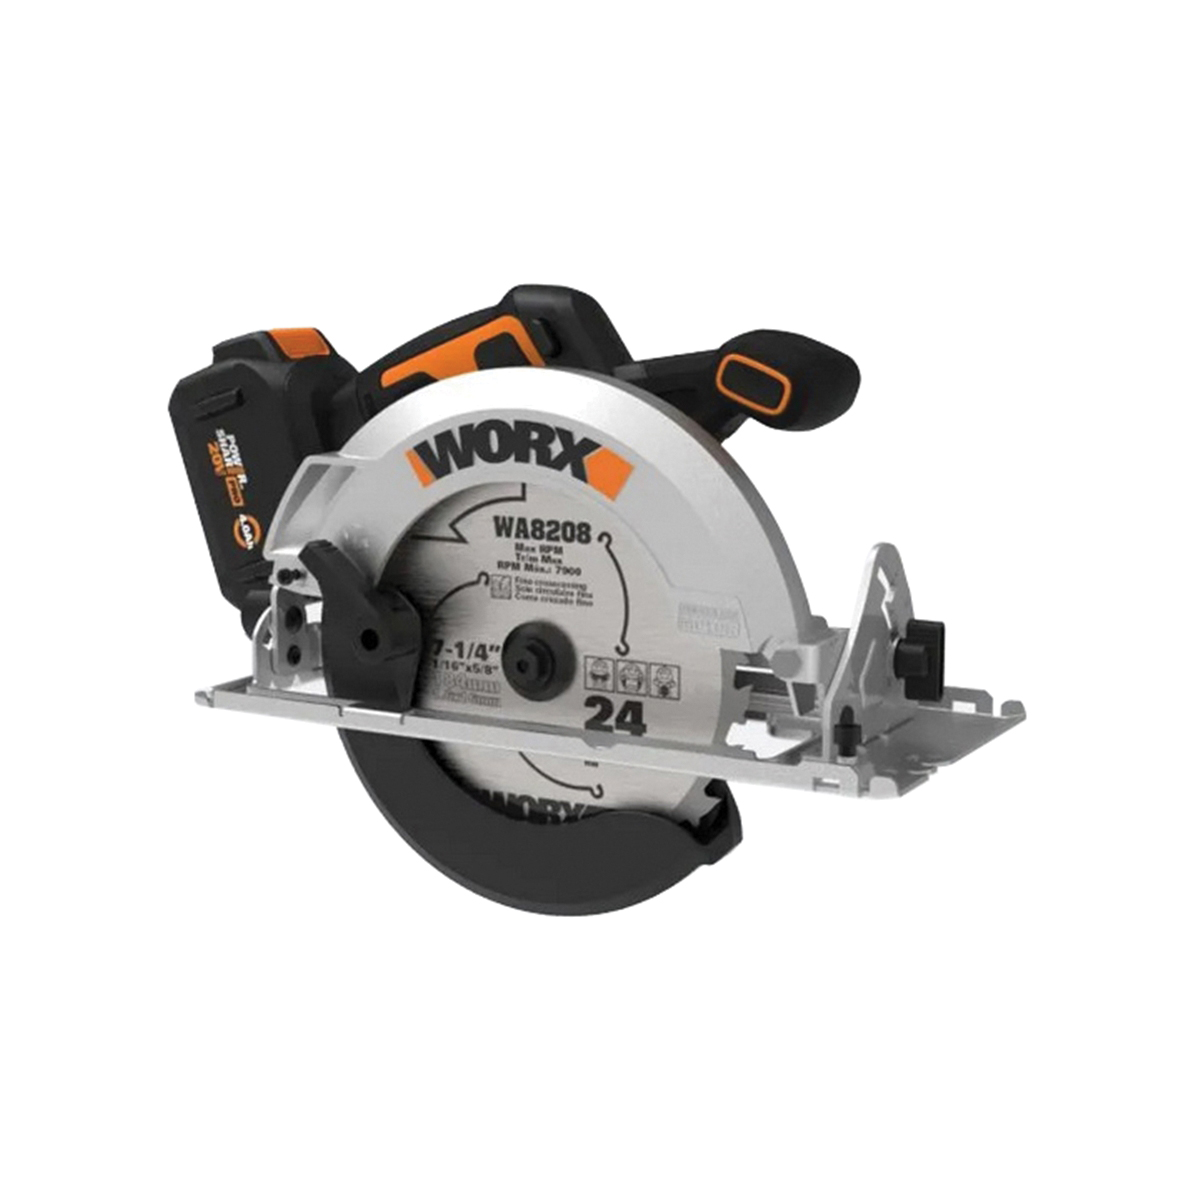 WX520L Cordless Circular Saw with Brushless Motor, Battery Included, 20 V, 4 Ah, 7-1/4 in Dia Blade